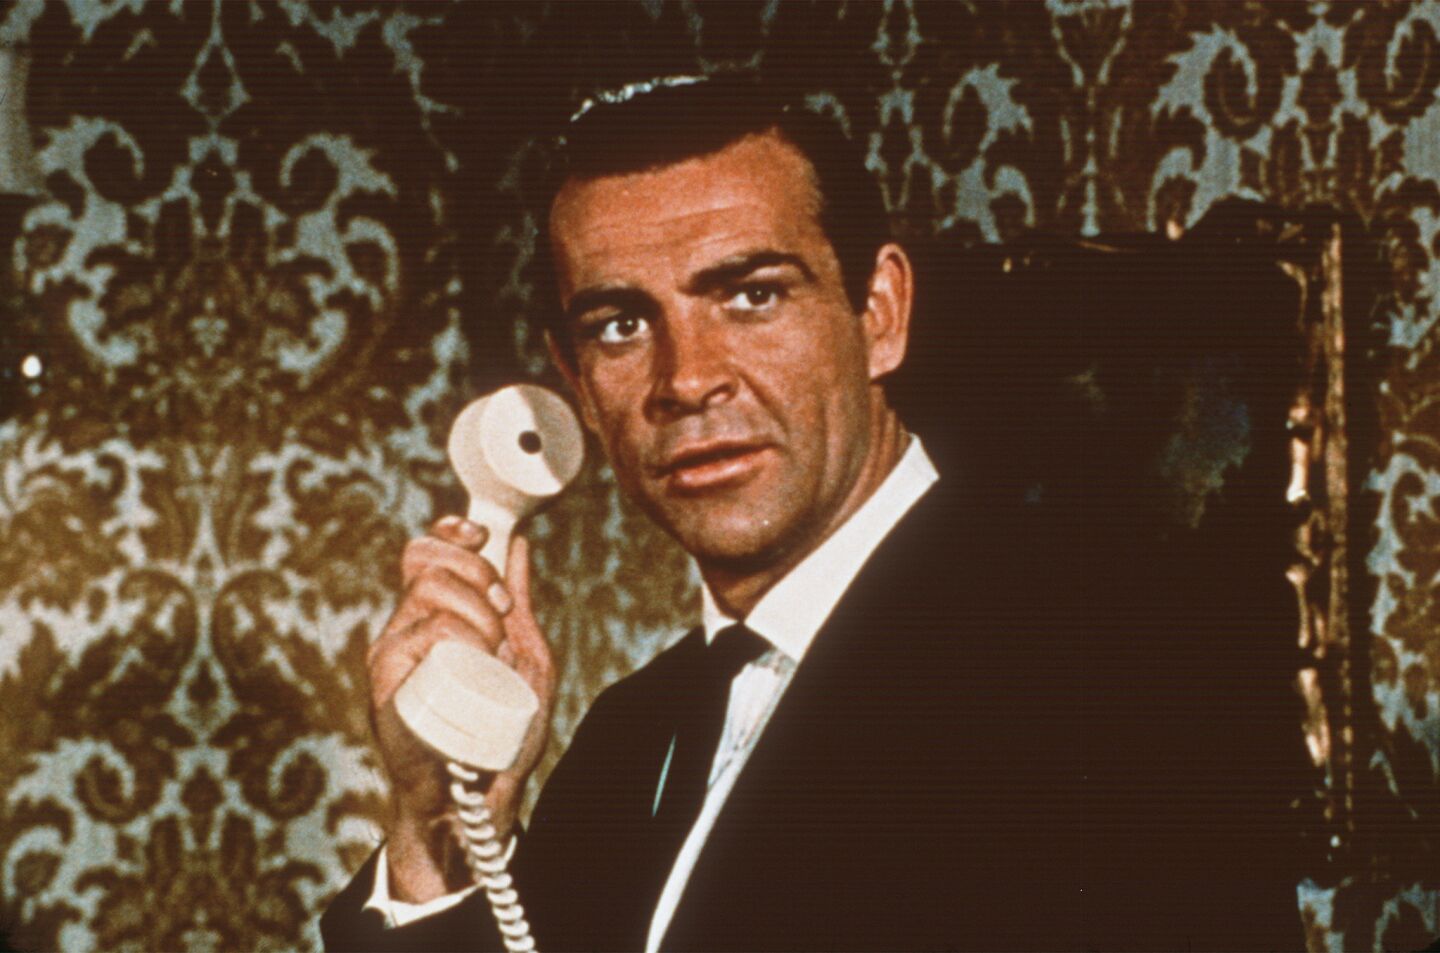 Sean Connery was forever tied to the role of James Bond, secret agent 007, who preferred his martinis shaken, not stirred. The Scottish actor first took on the role in the 1962 action-thriller “Dr. No,” which launched one of the most successful movie franchises of all time. He was 90.